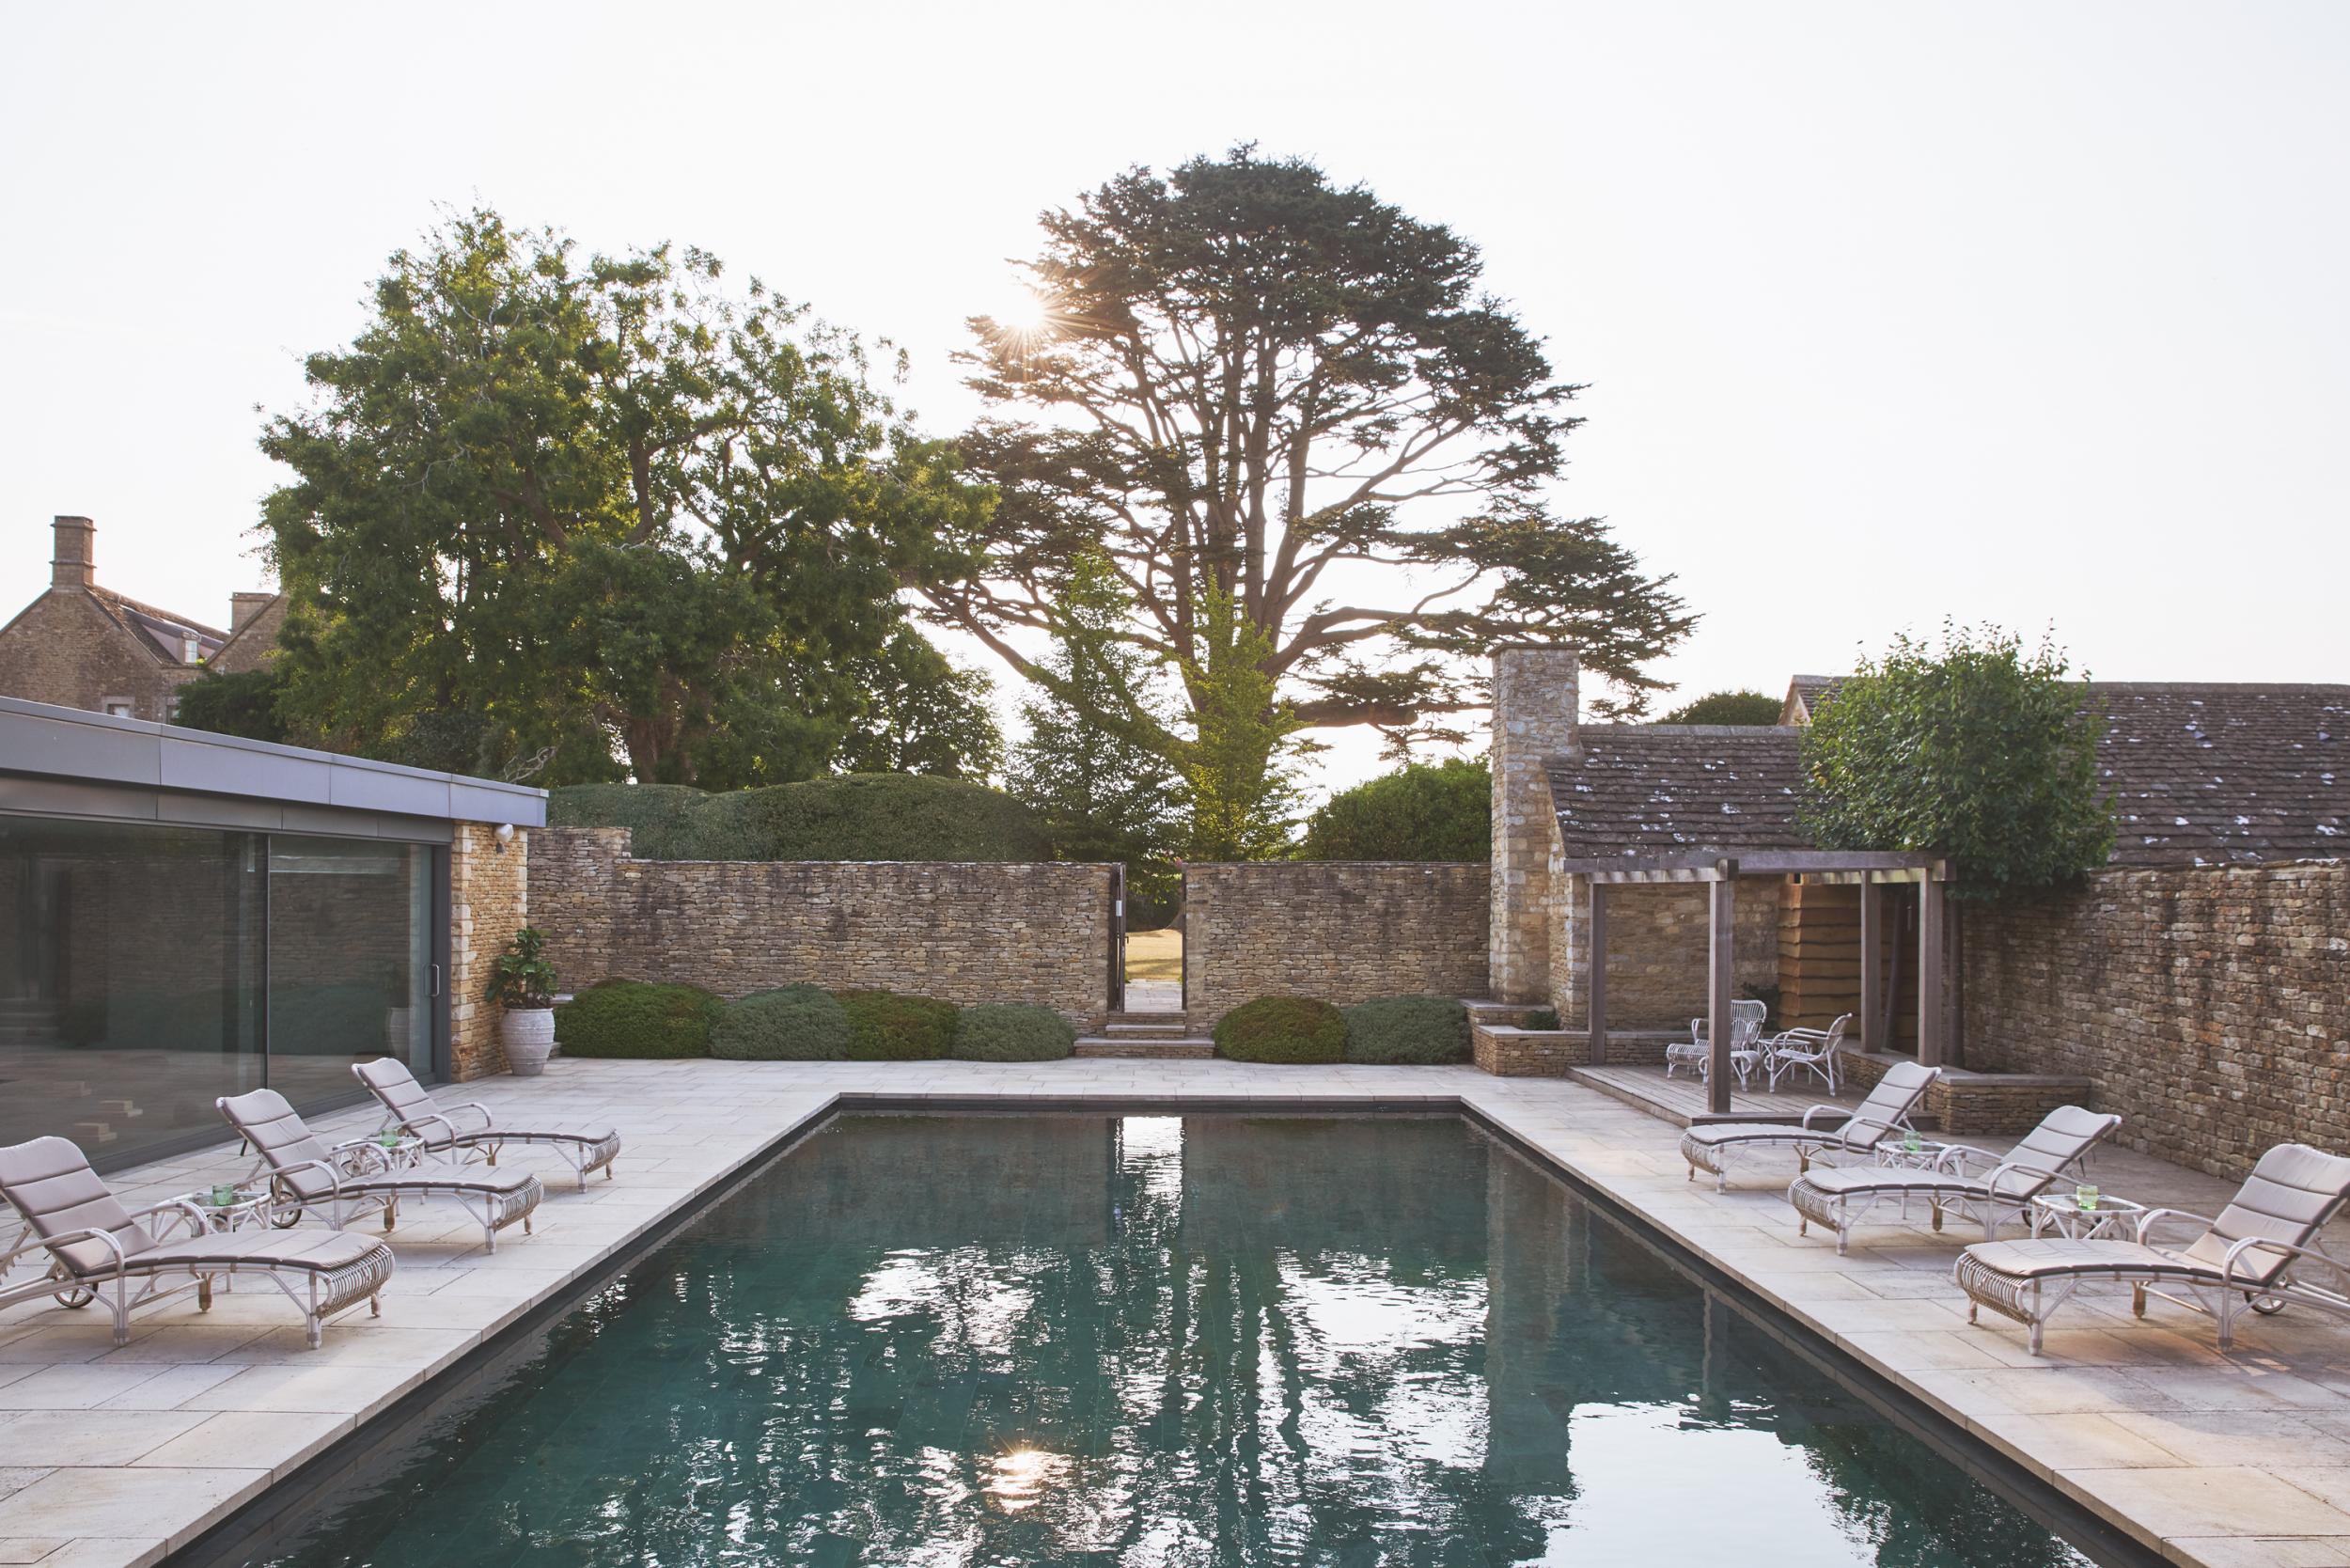 Thyme has an outdoor swimming pool and spa access